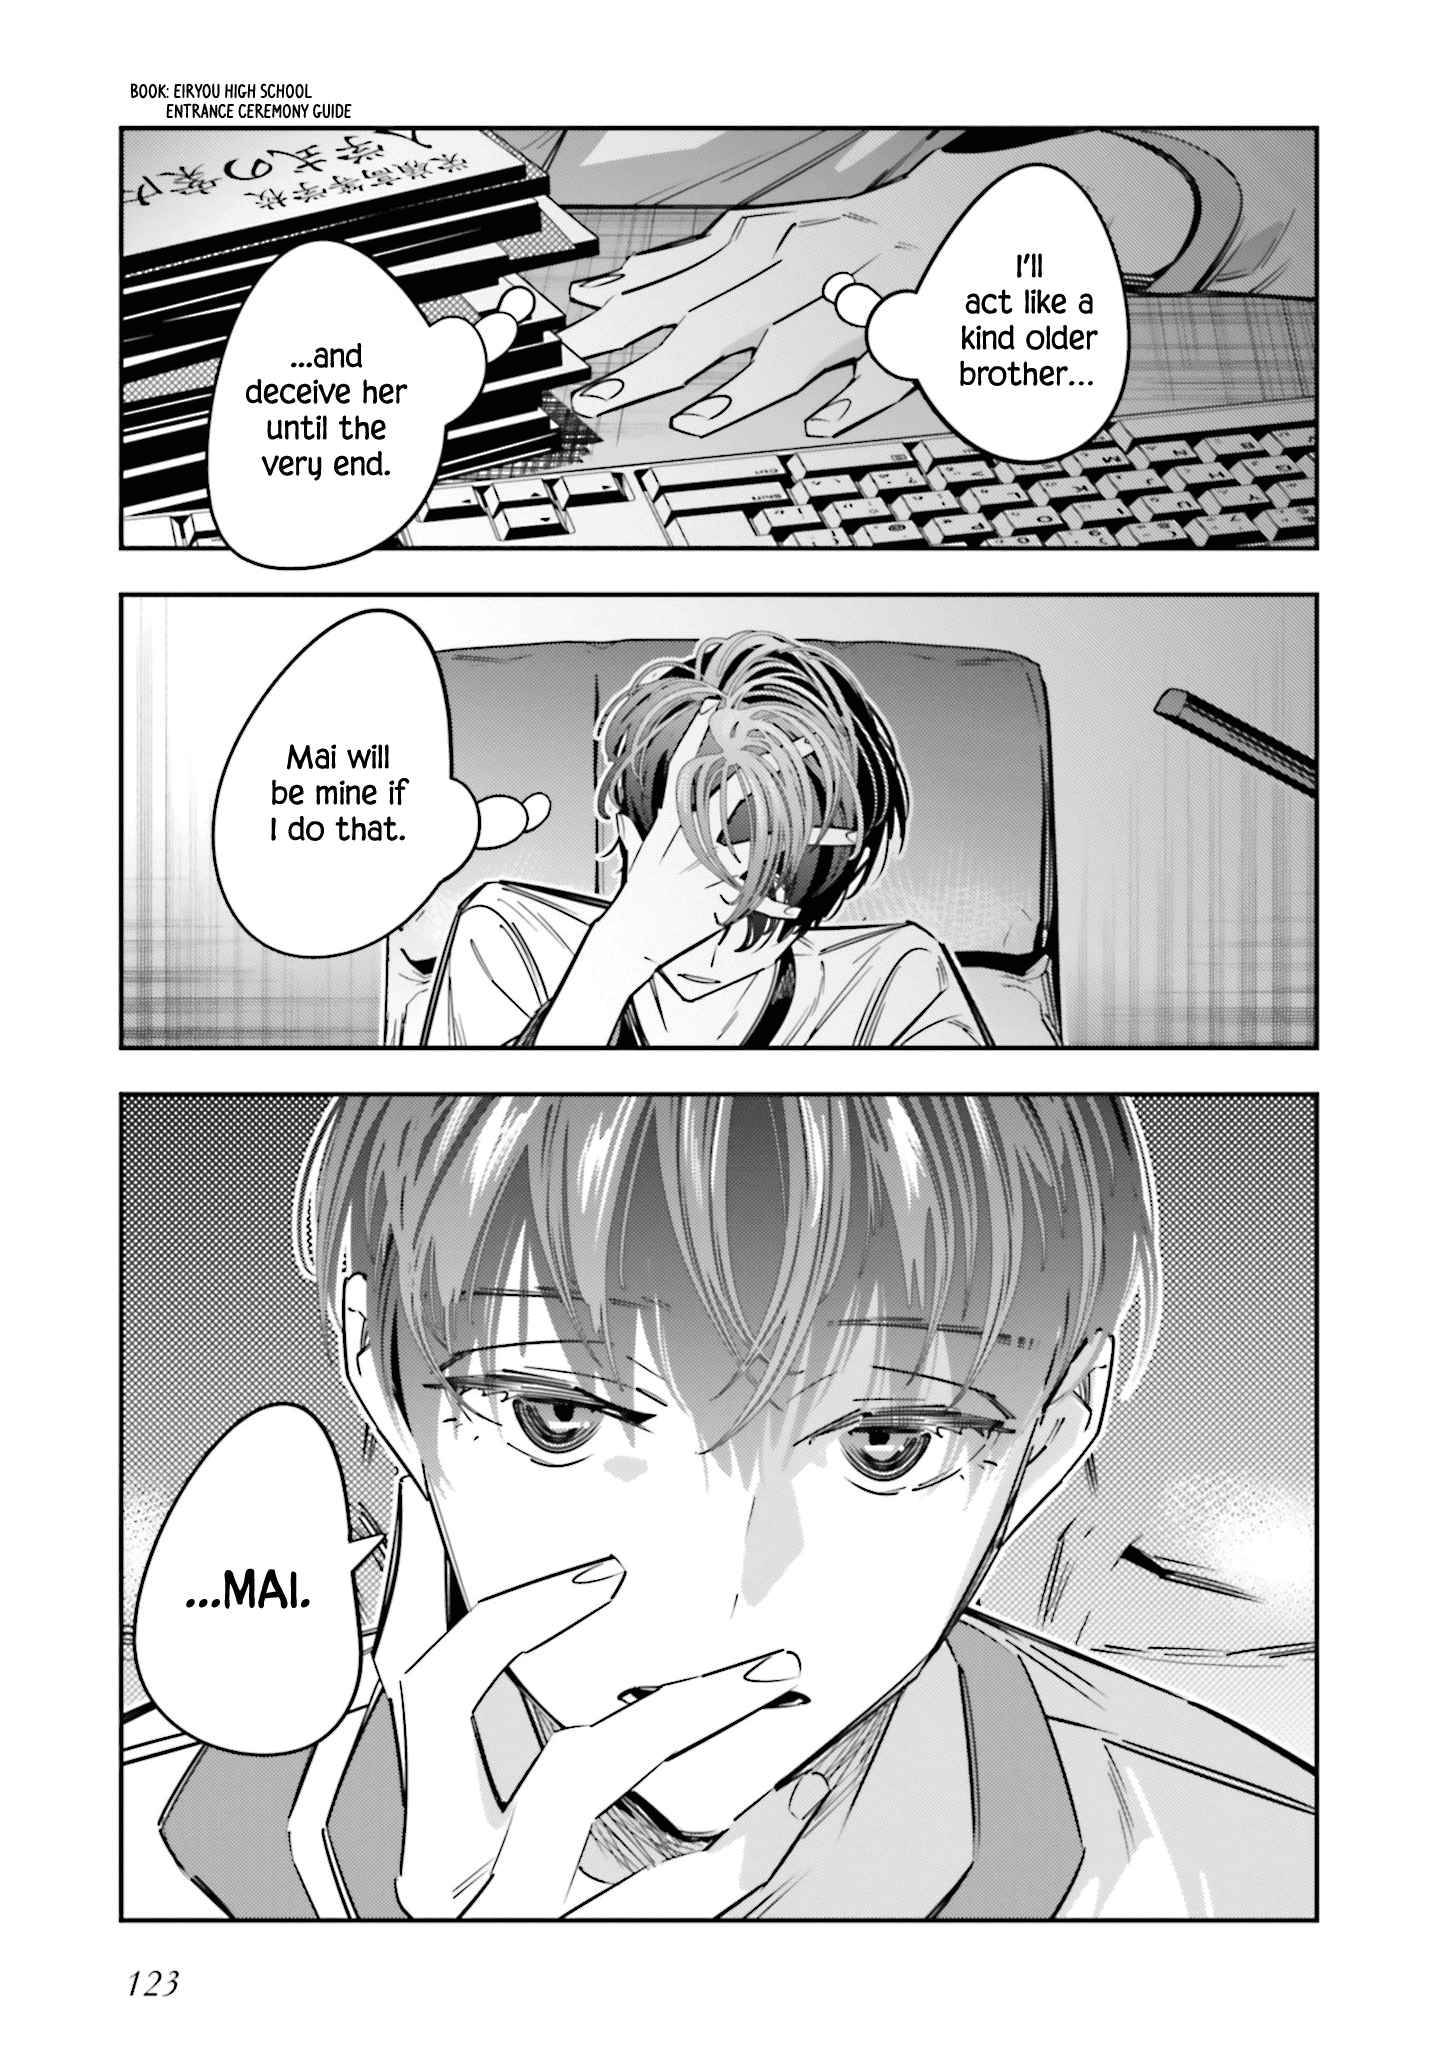 I Reincarnated As The Little Sister Of A Death Game Manga’S Murd3R Mastermind And Failed - chapter 9 - #5